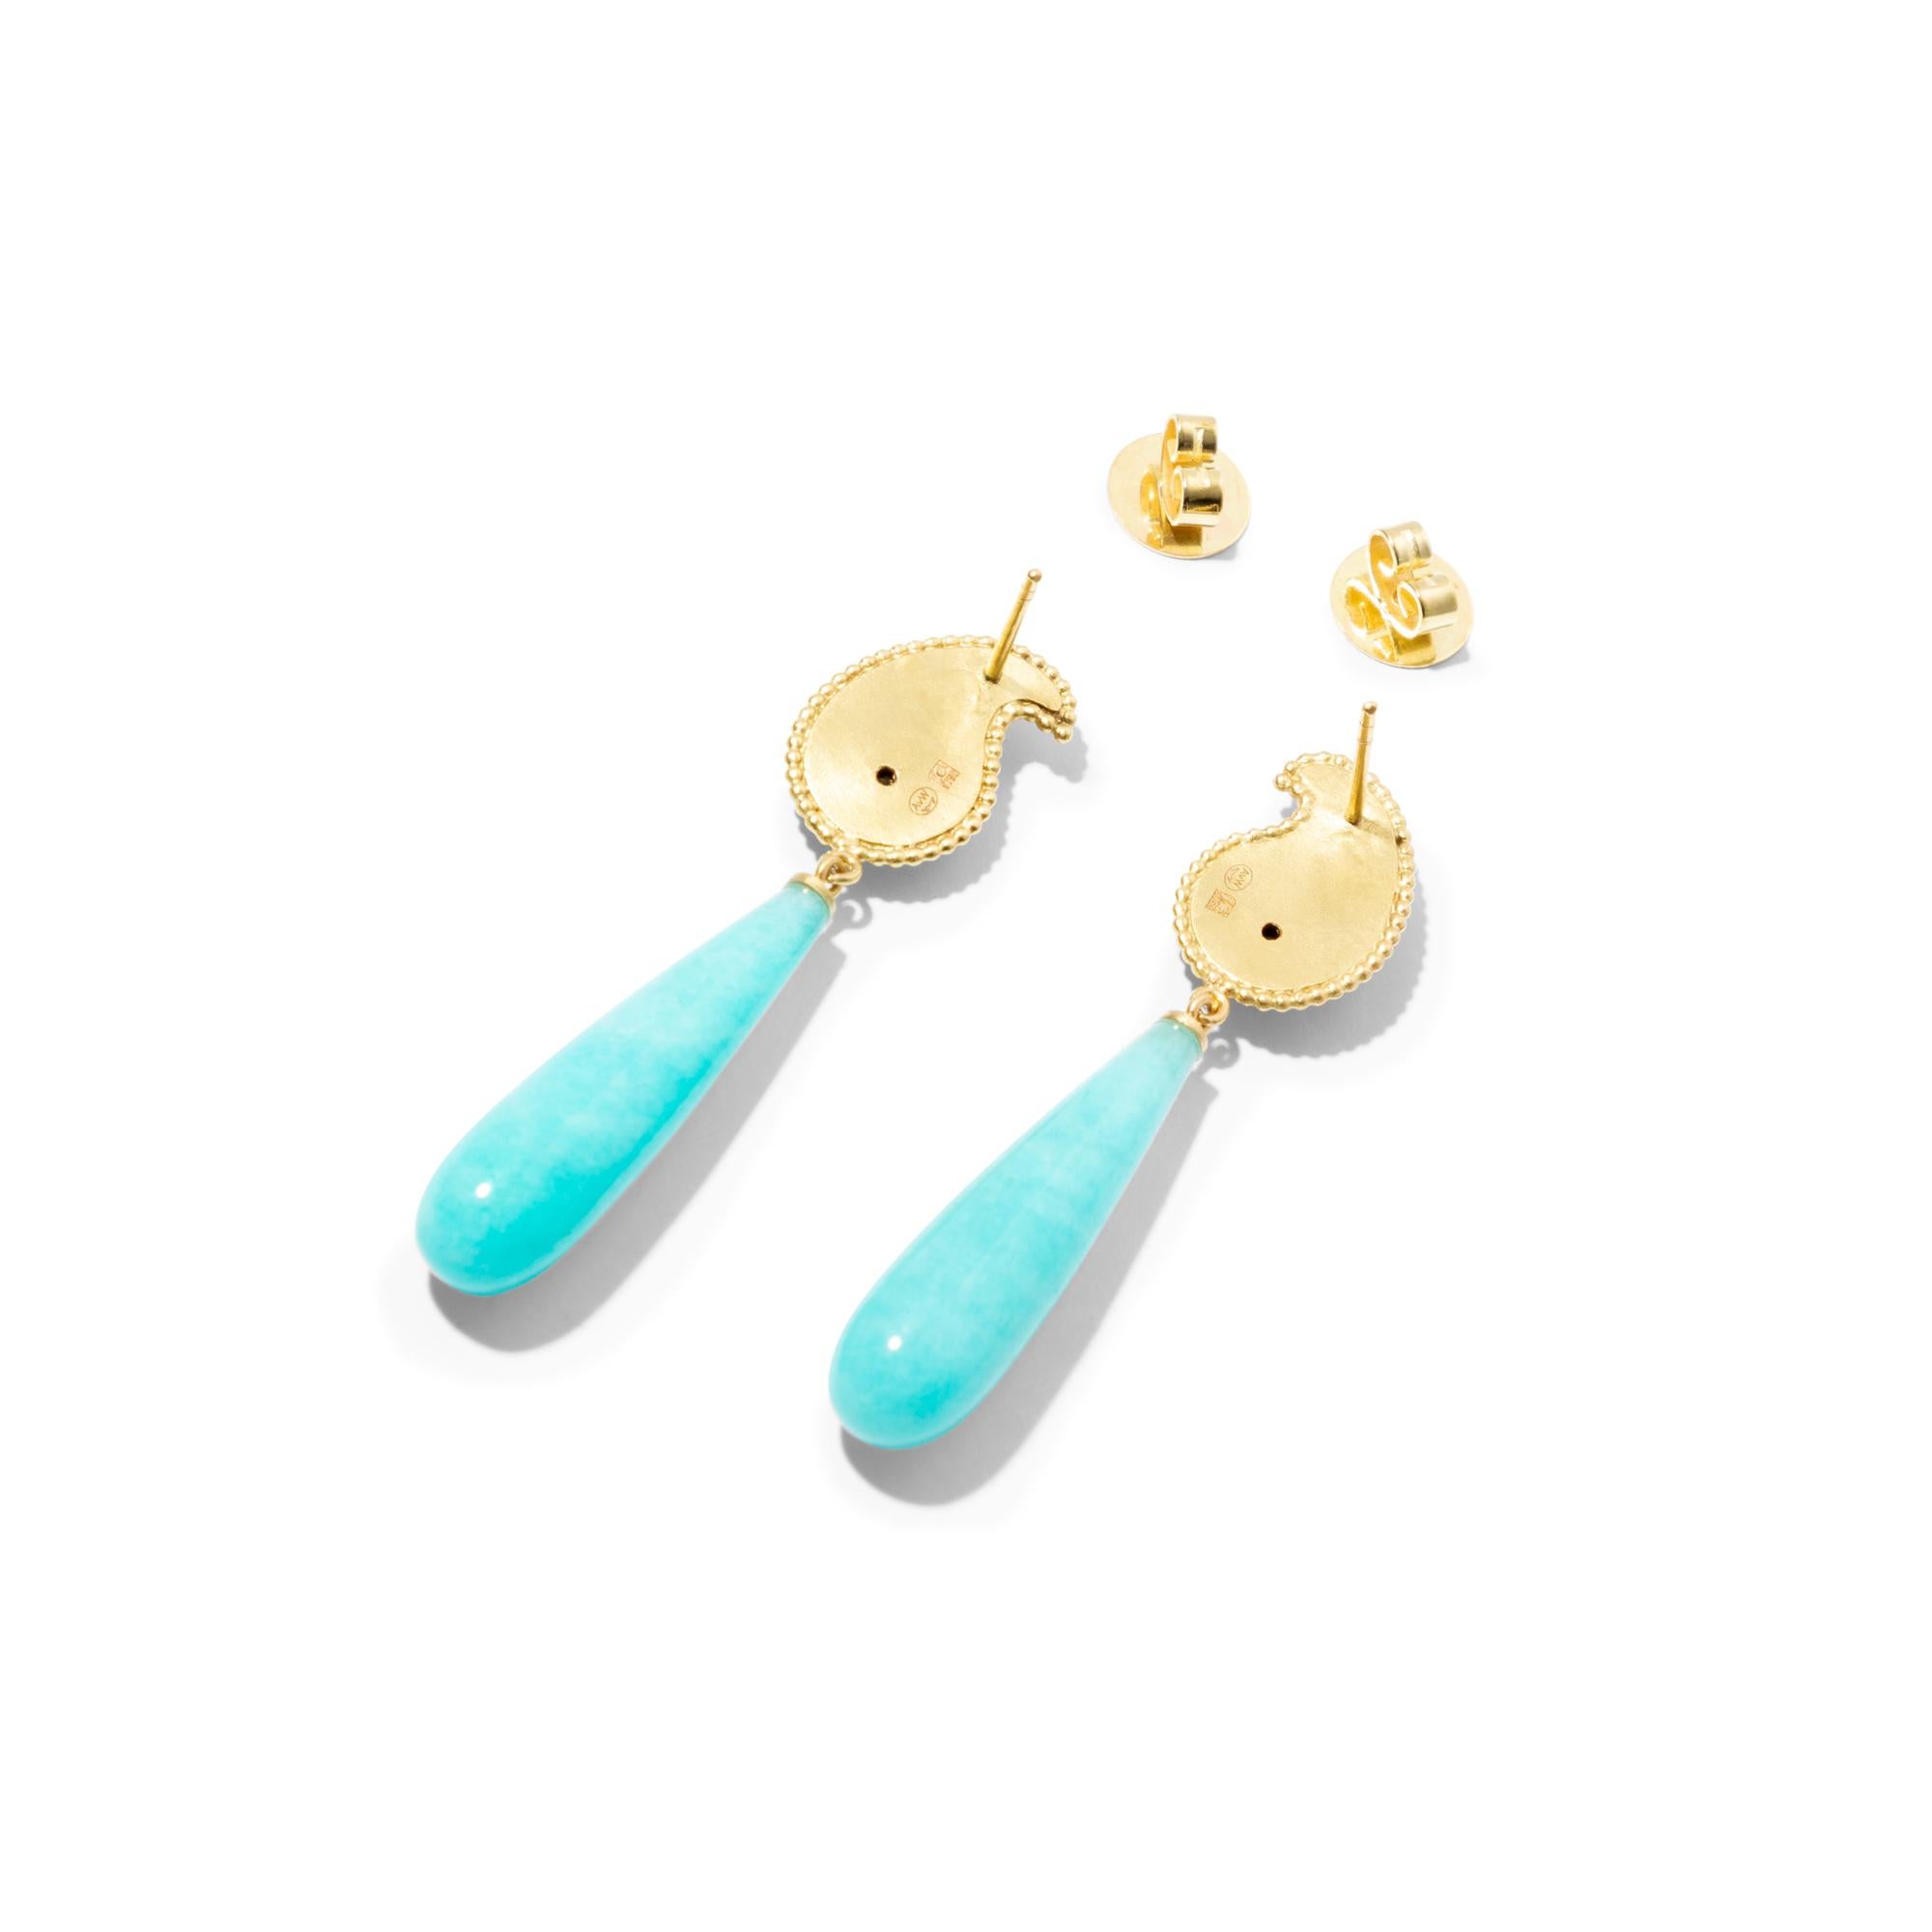 An eye-catching pair of 18k gold earrings with amazonite drops dangling from a paisley motif set with opal doublets. The paisley motif sits neatly on the earlobe covering the pierced hole for a finished look. Let the vibrant color of the amazonite